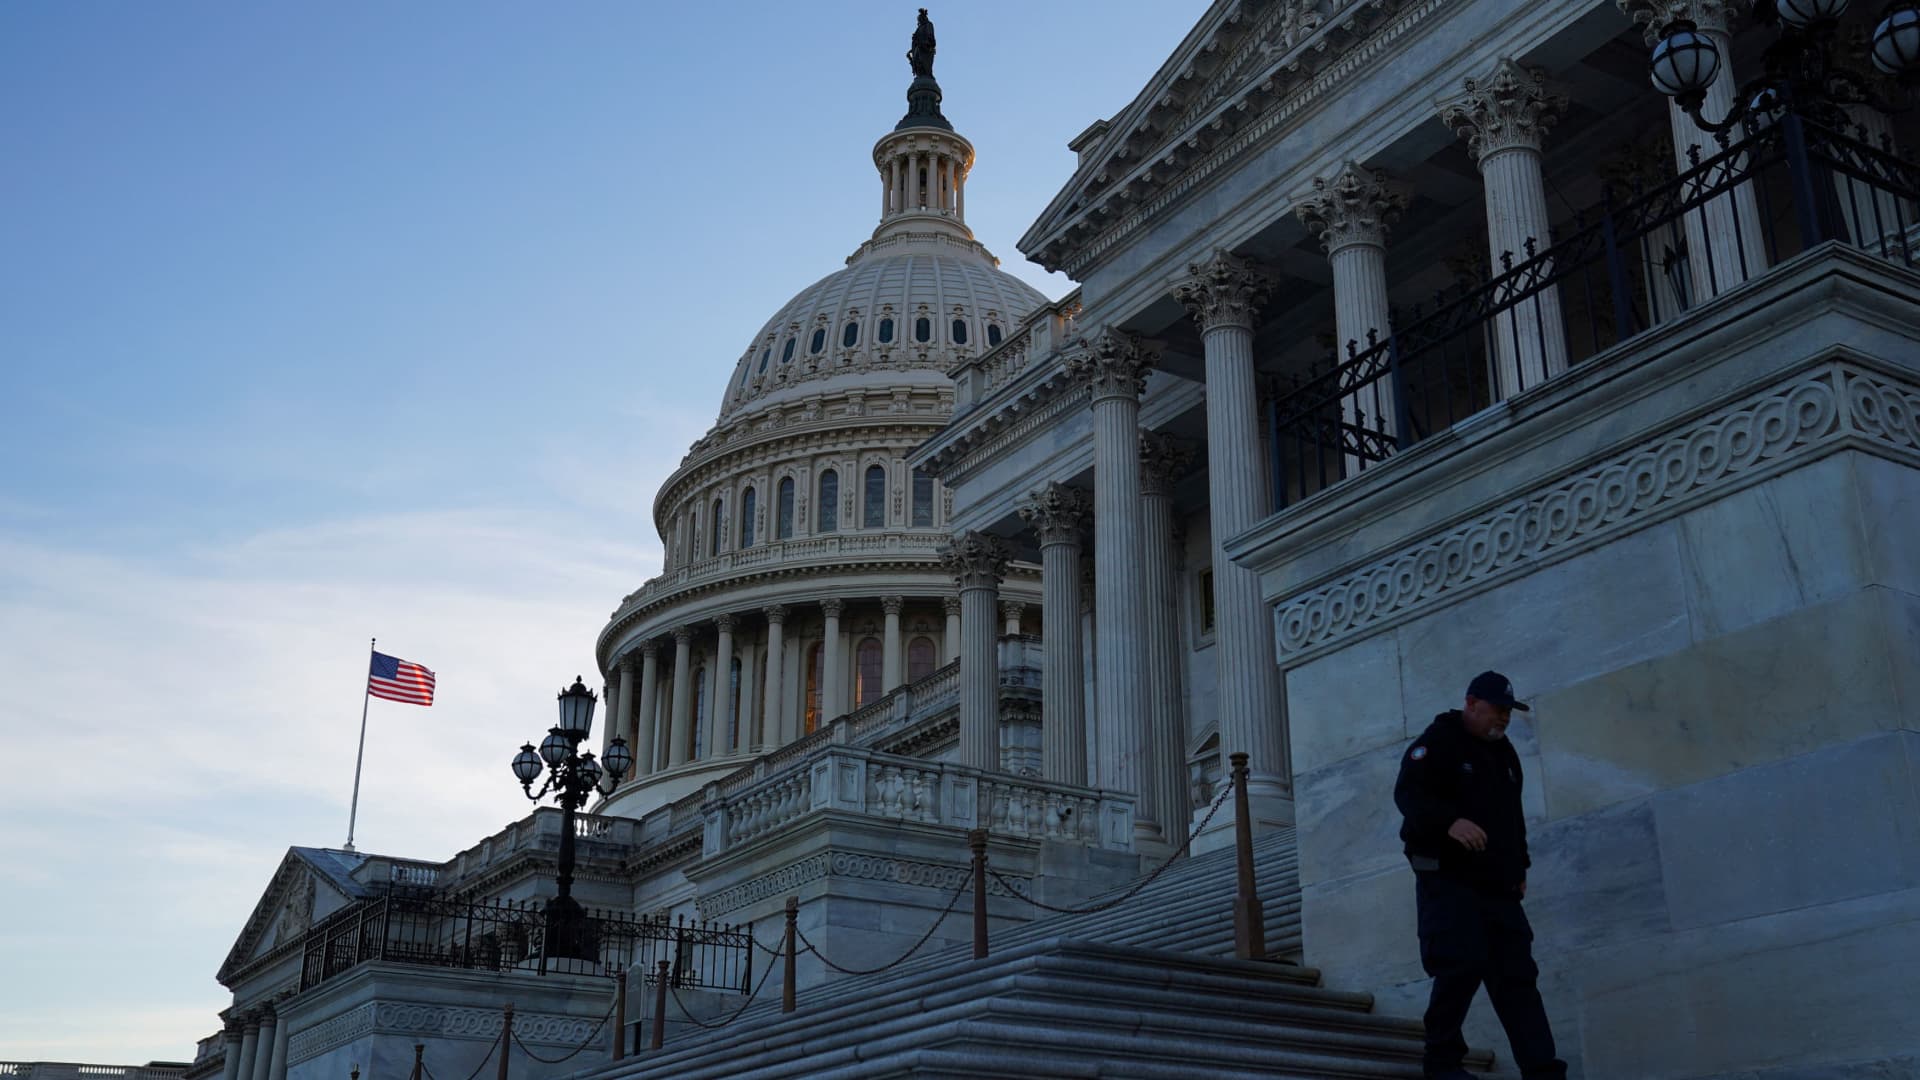 Congress releases major spending bill with election reforms to prevent another Jan. 6